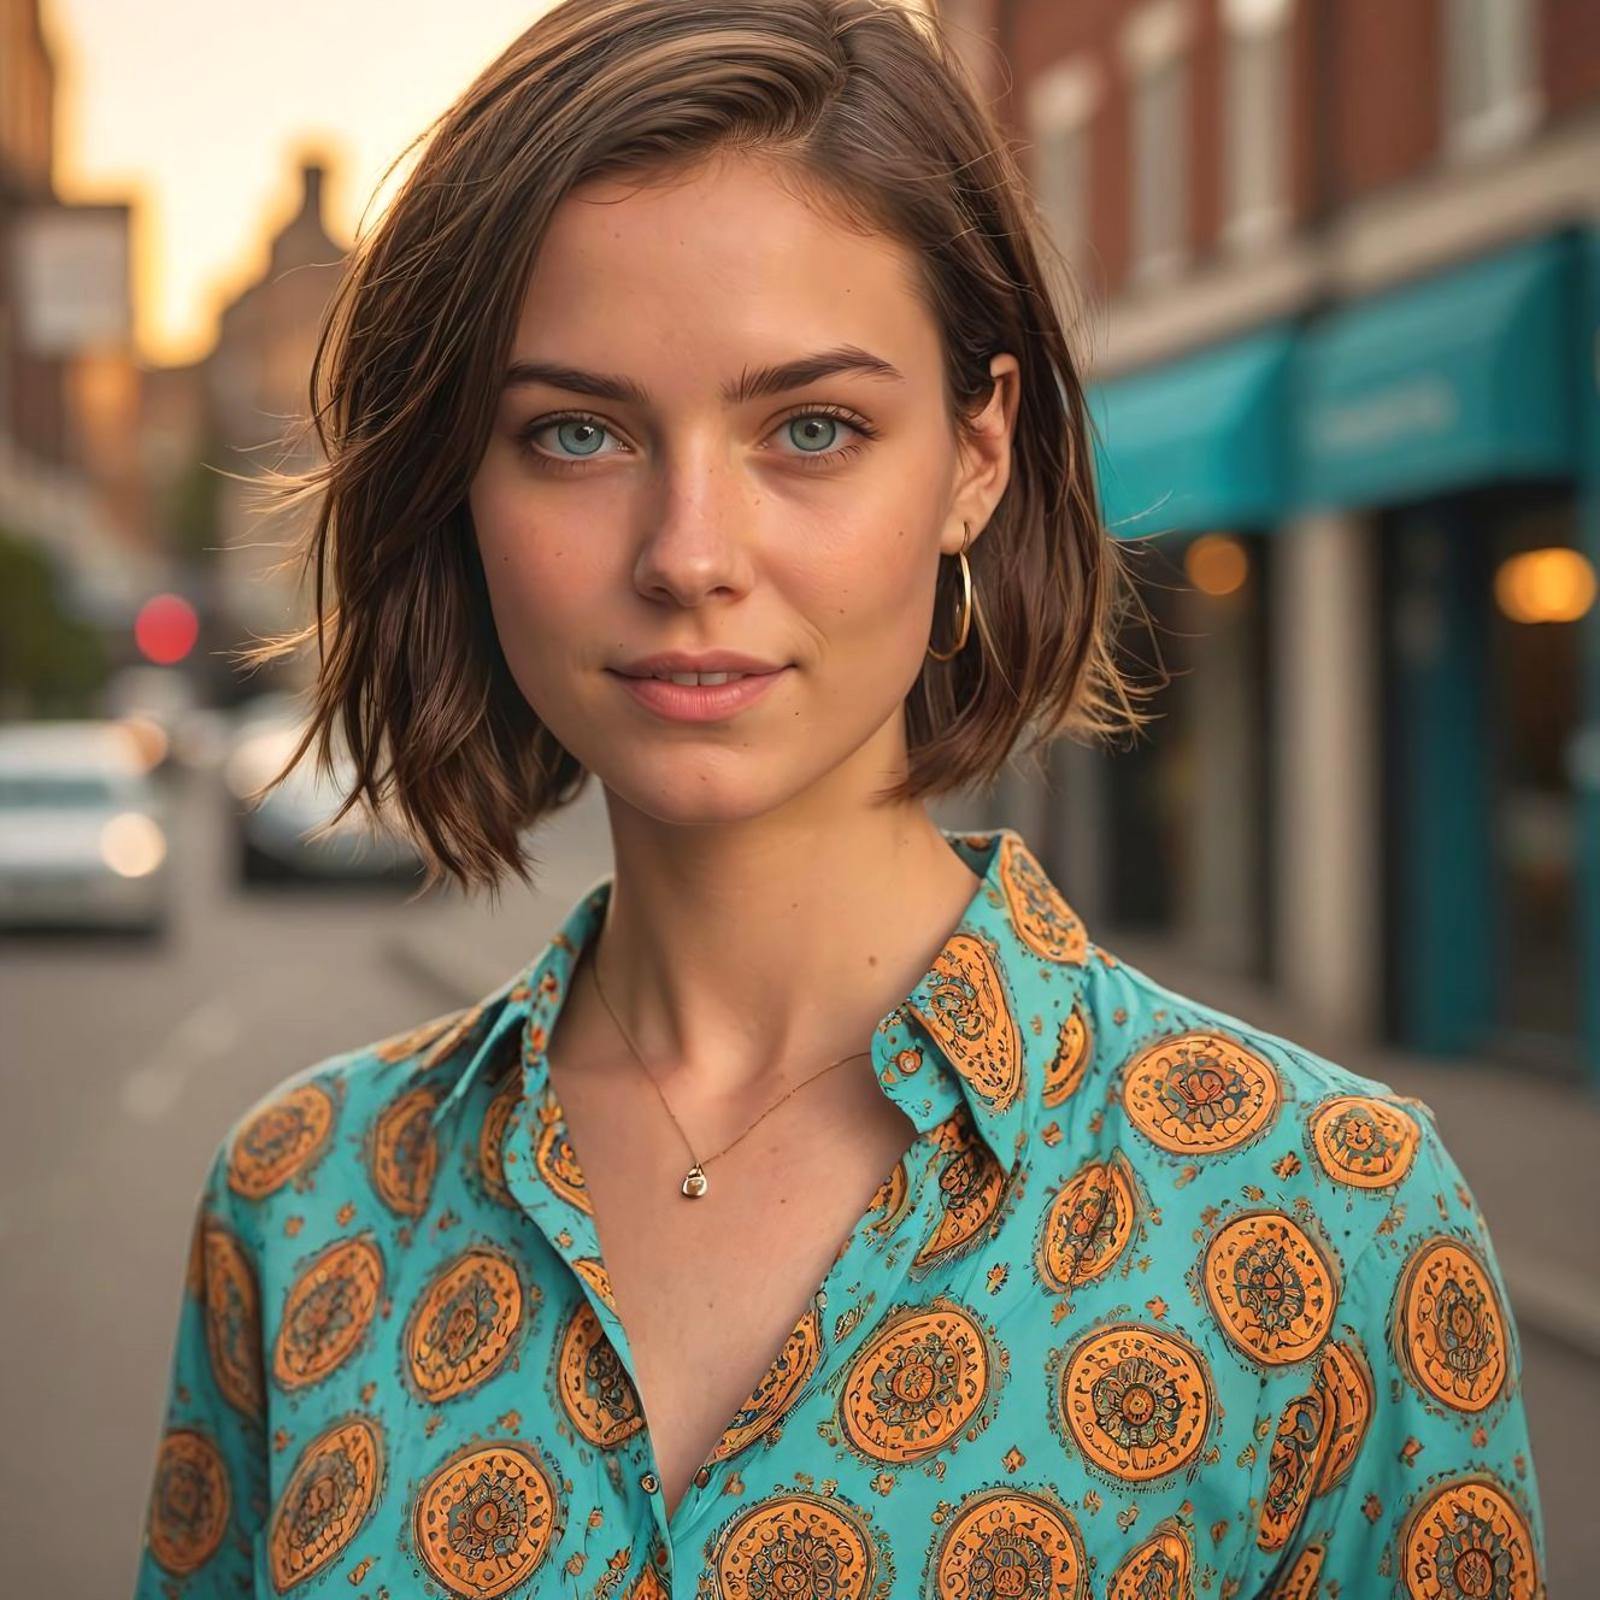 A young woman wearing a turquoise shirt with a brown pattern is standing in front of a blue building.